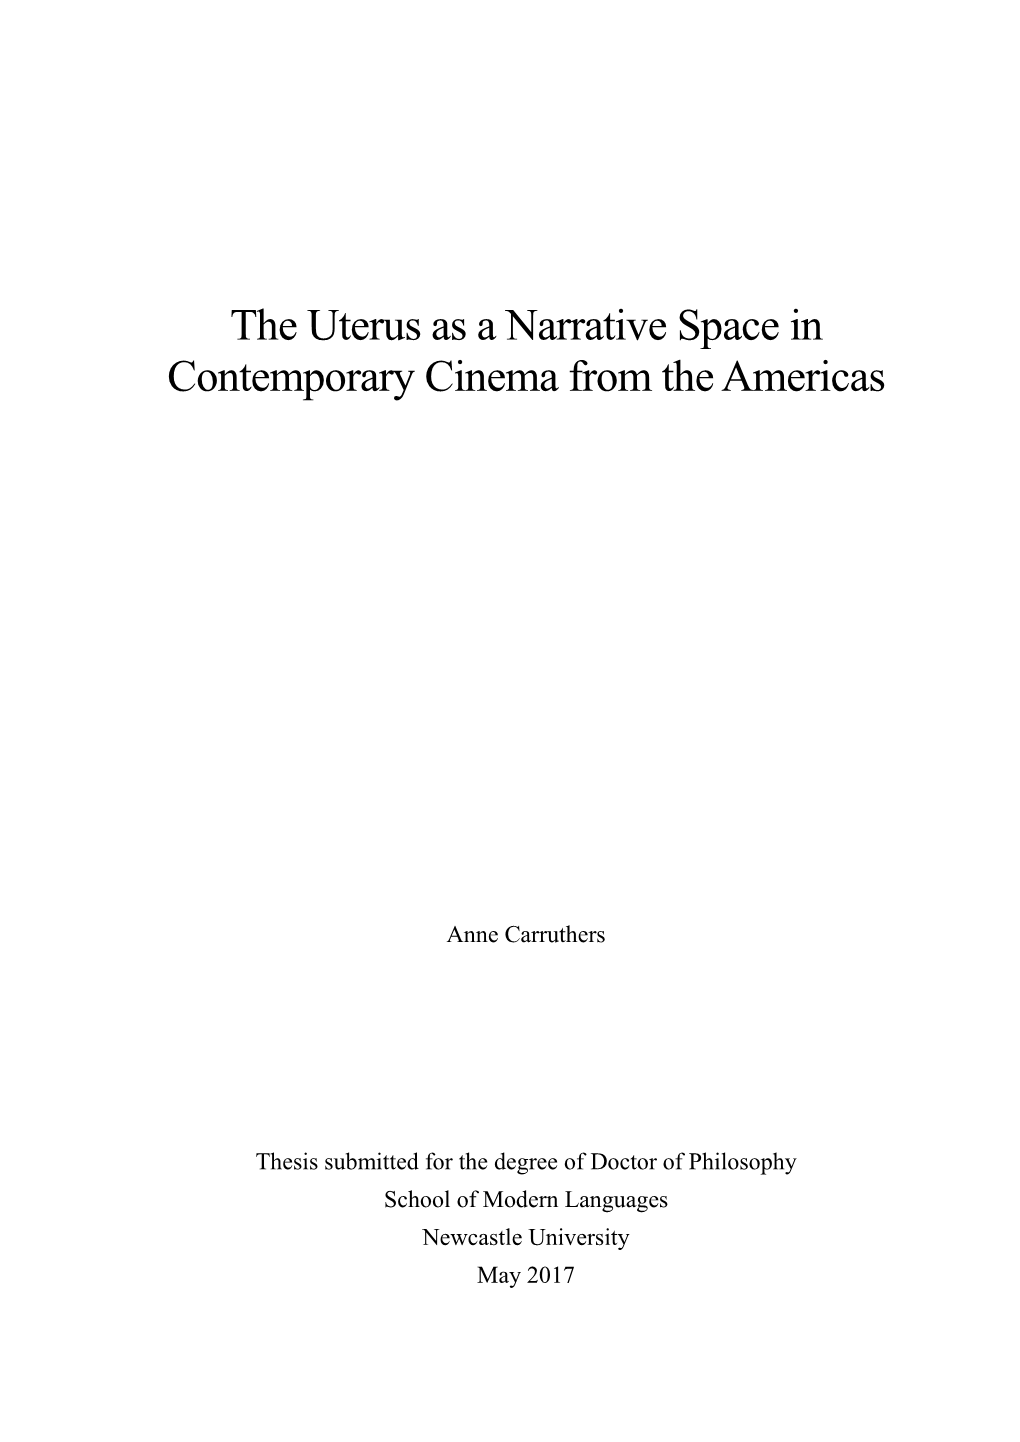 The Uterus As a Narrative Space in Contemporary Cinema from the Americas